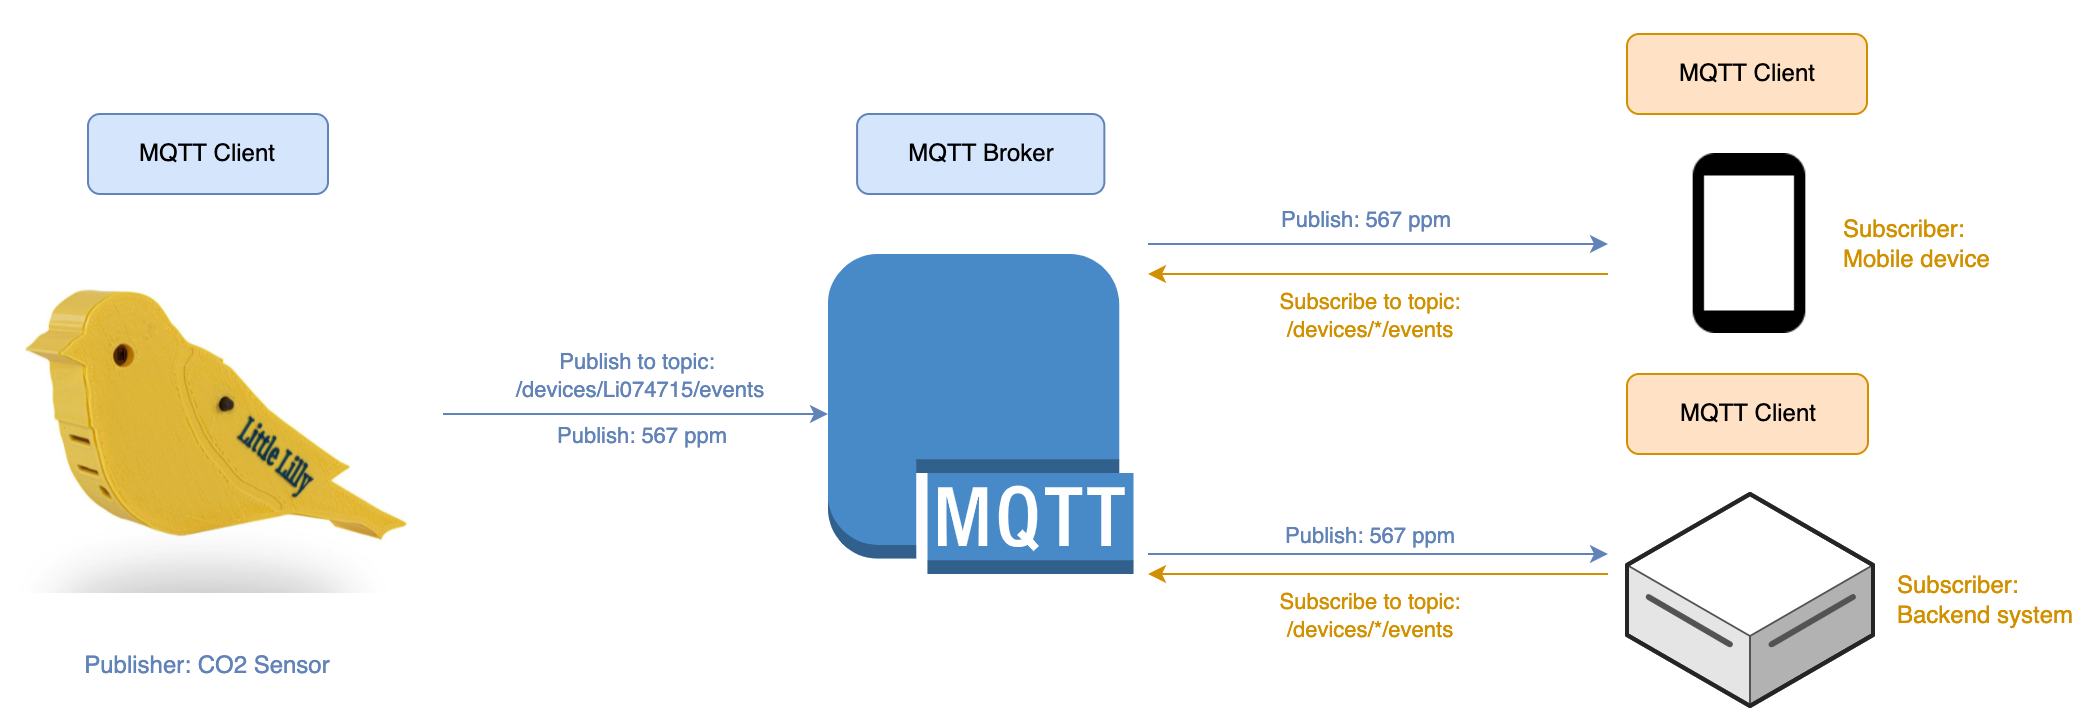 Scheme detailing how MQTT clients and brokers interact to publish and subscribe to data